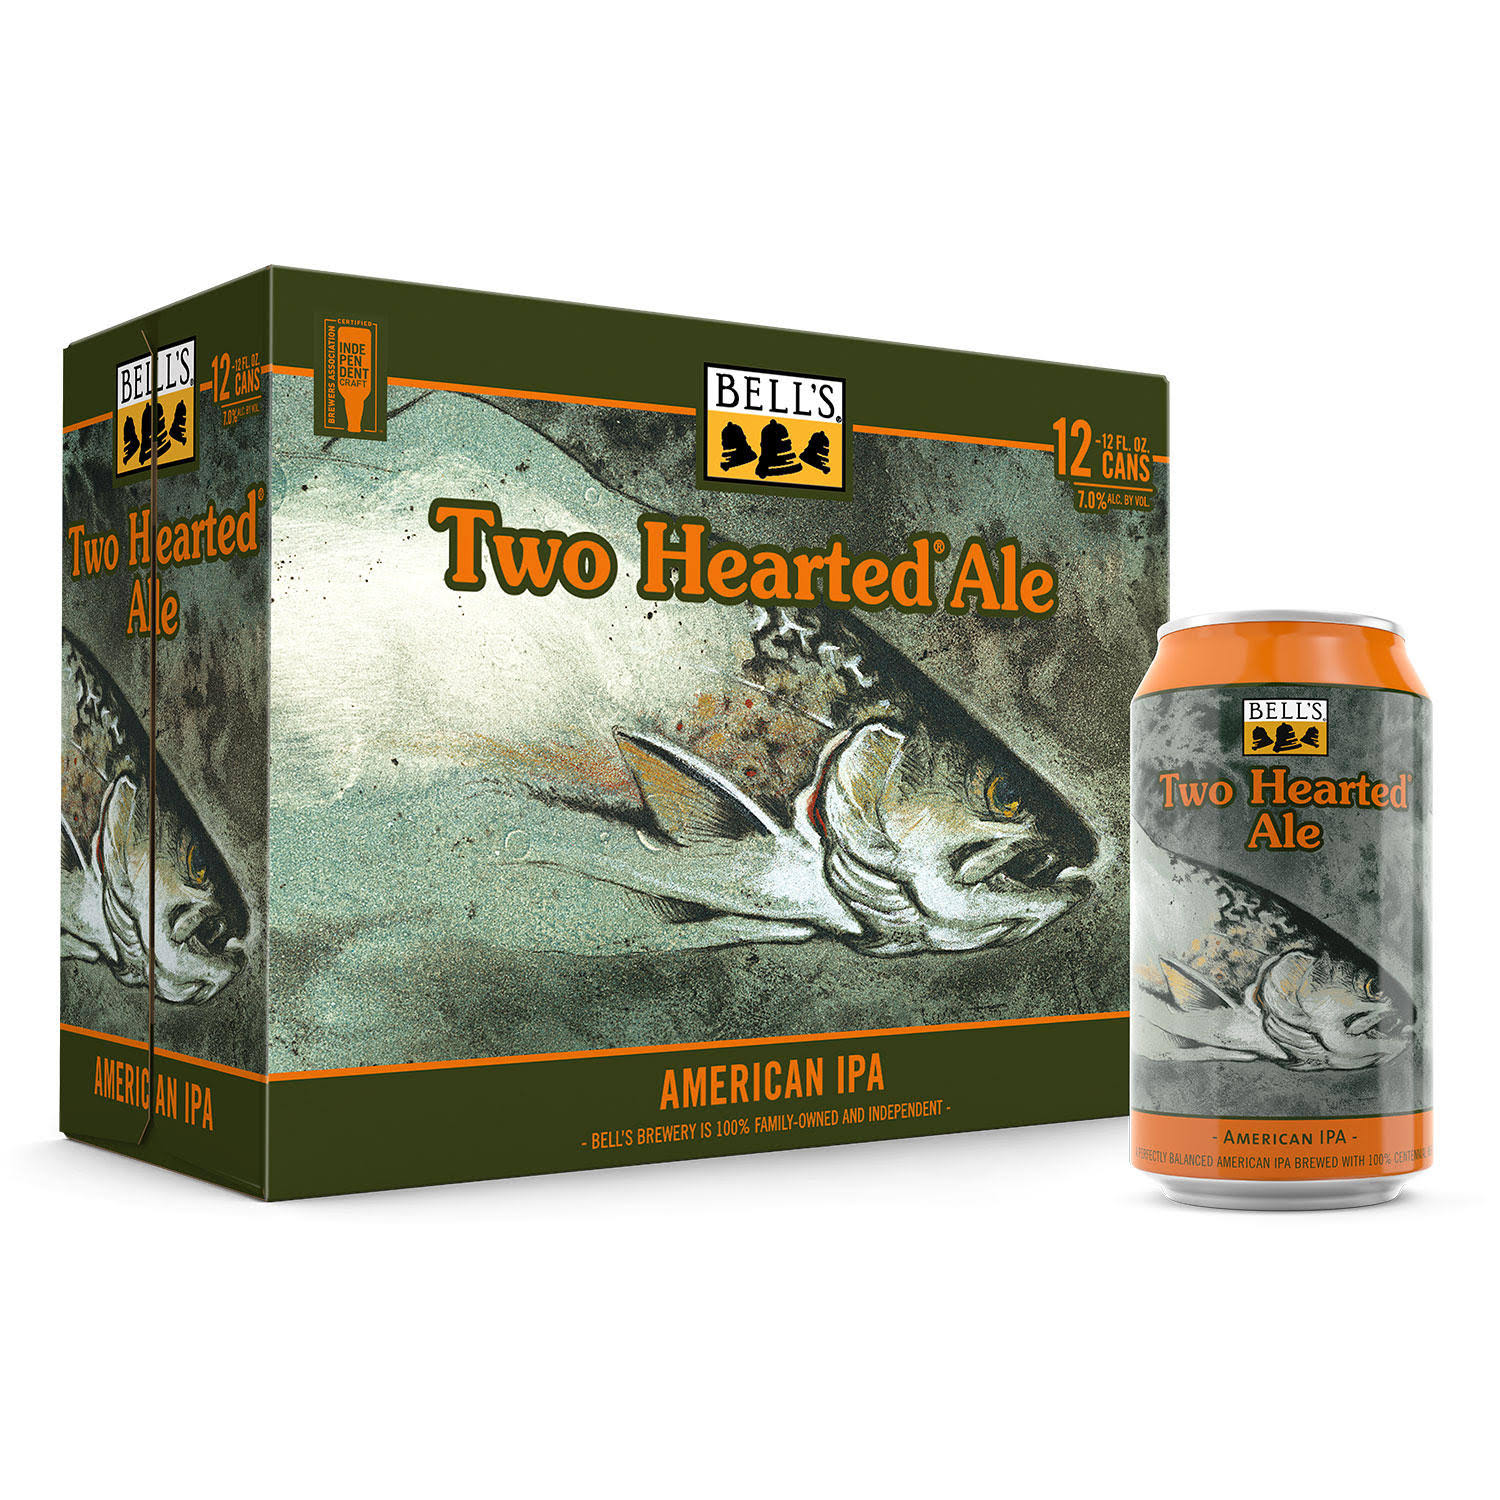 Bell's Bells Beer, American IPA, Two Hearted Ale, 12 Can Pack - 12 pack, 12 fl oz cans